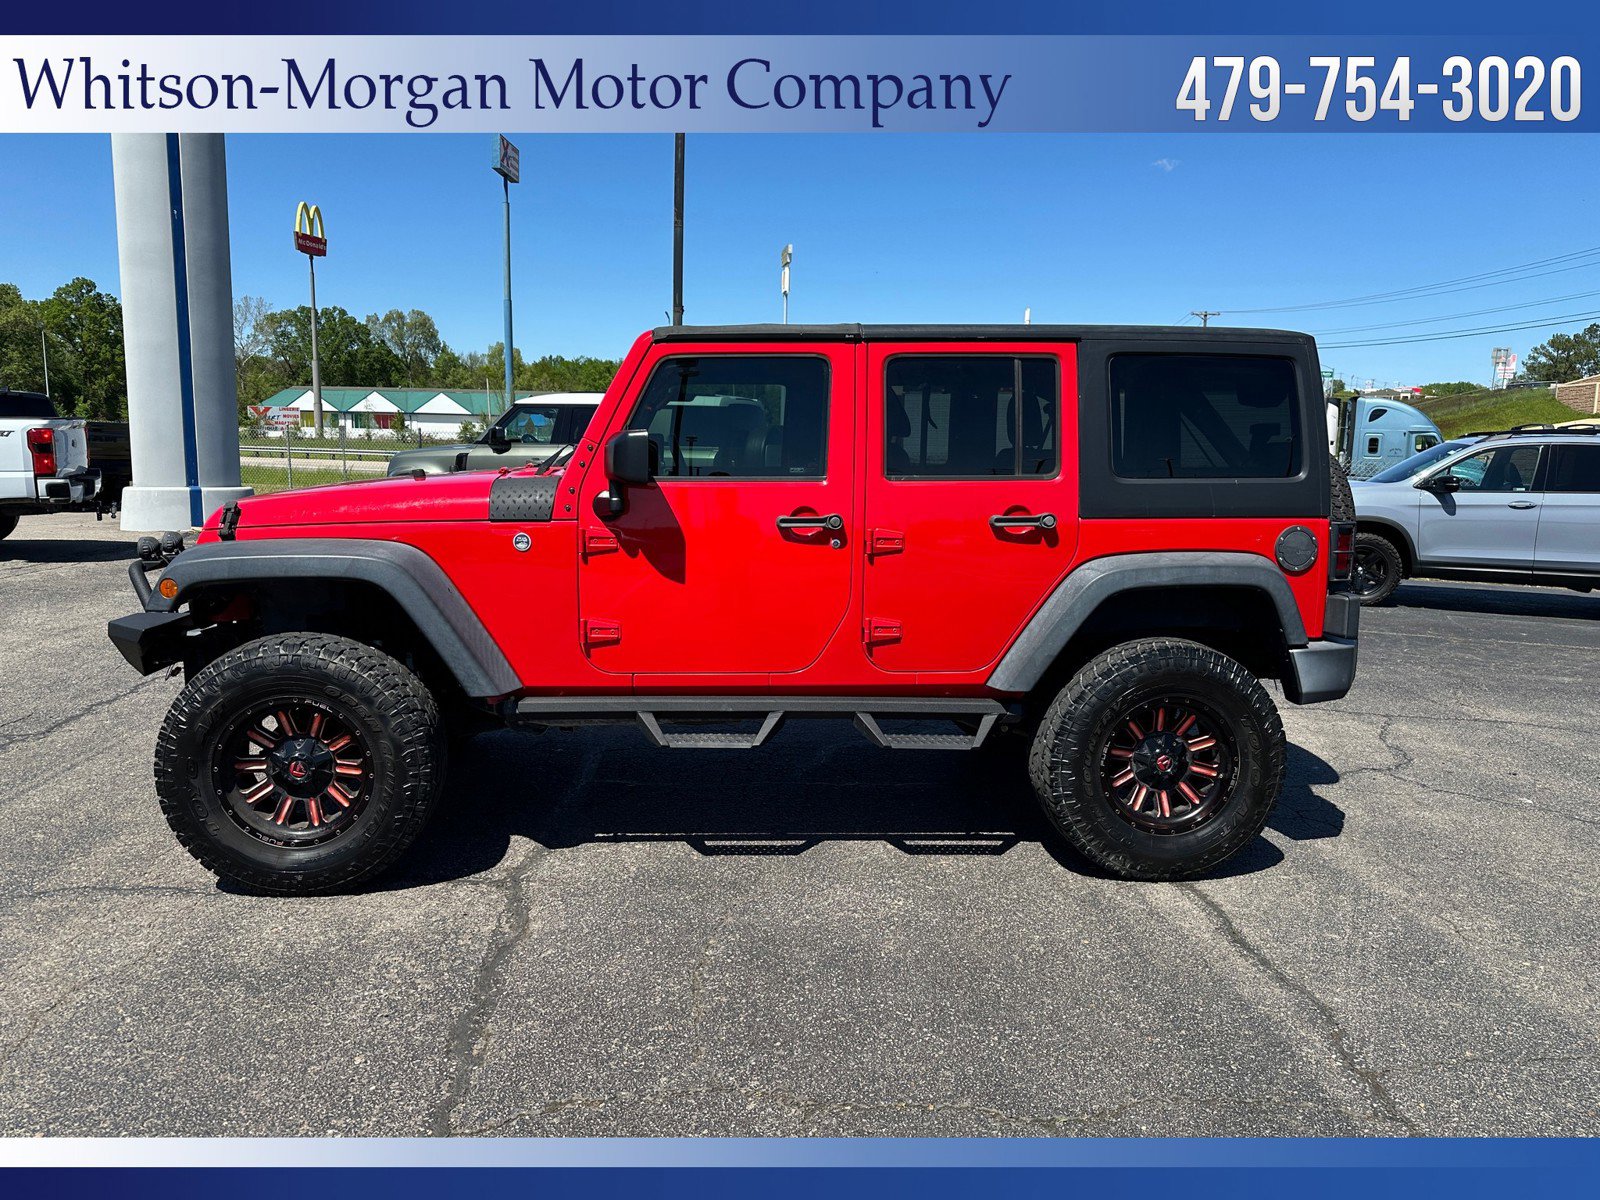 Used 2016 Jeep Wrangler Unlimited Black Bear with VIN 1C4BJWDG3GL121792 for sale in St. Cloud, Minnesota